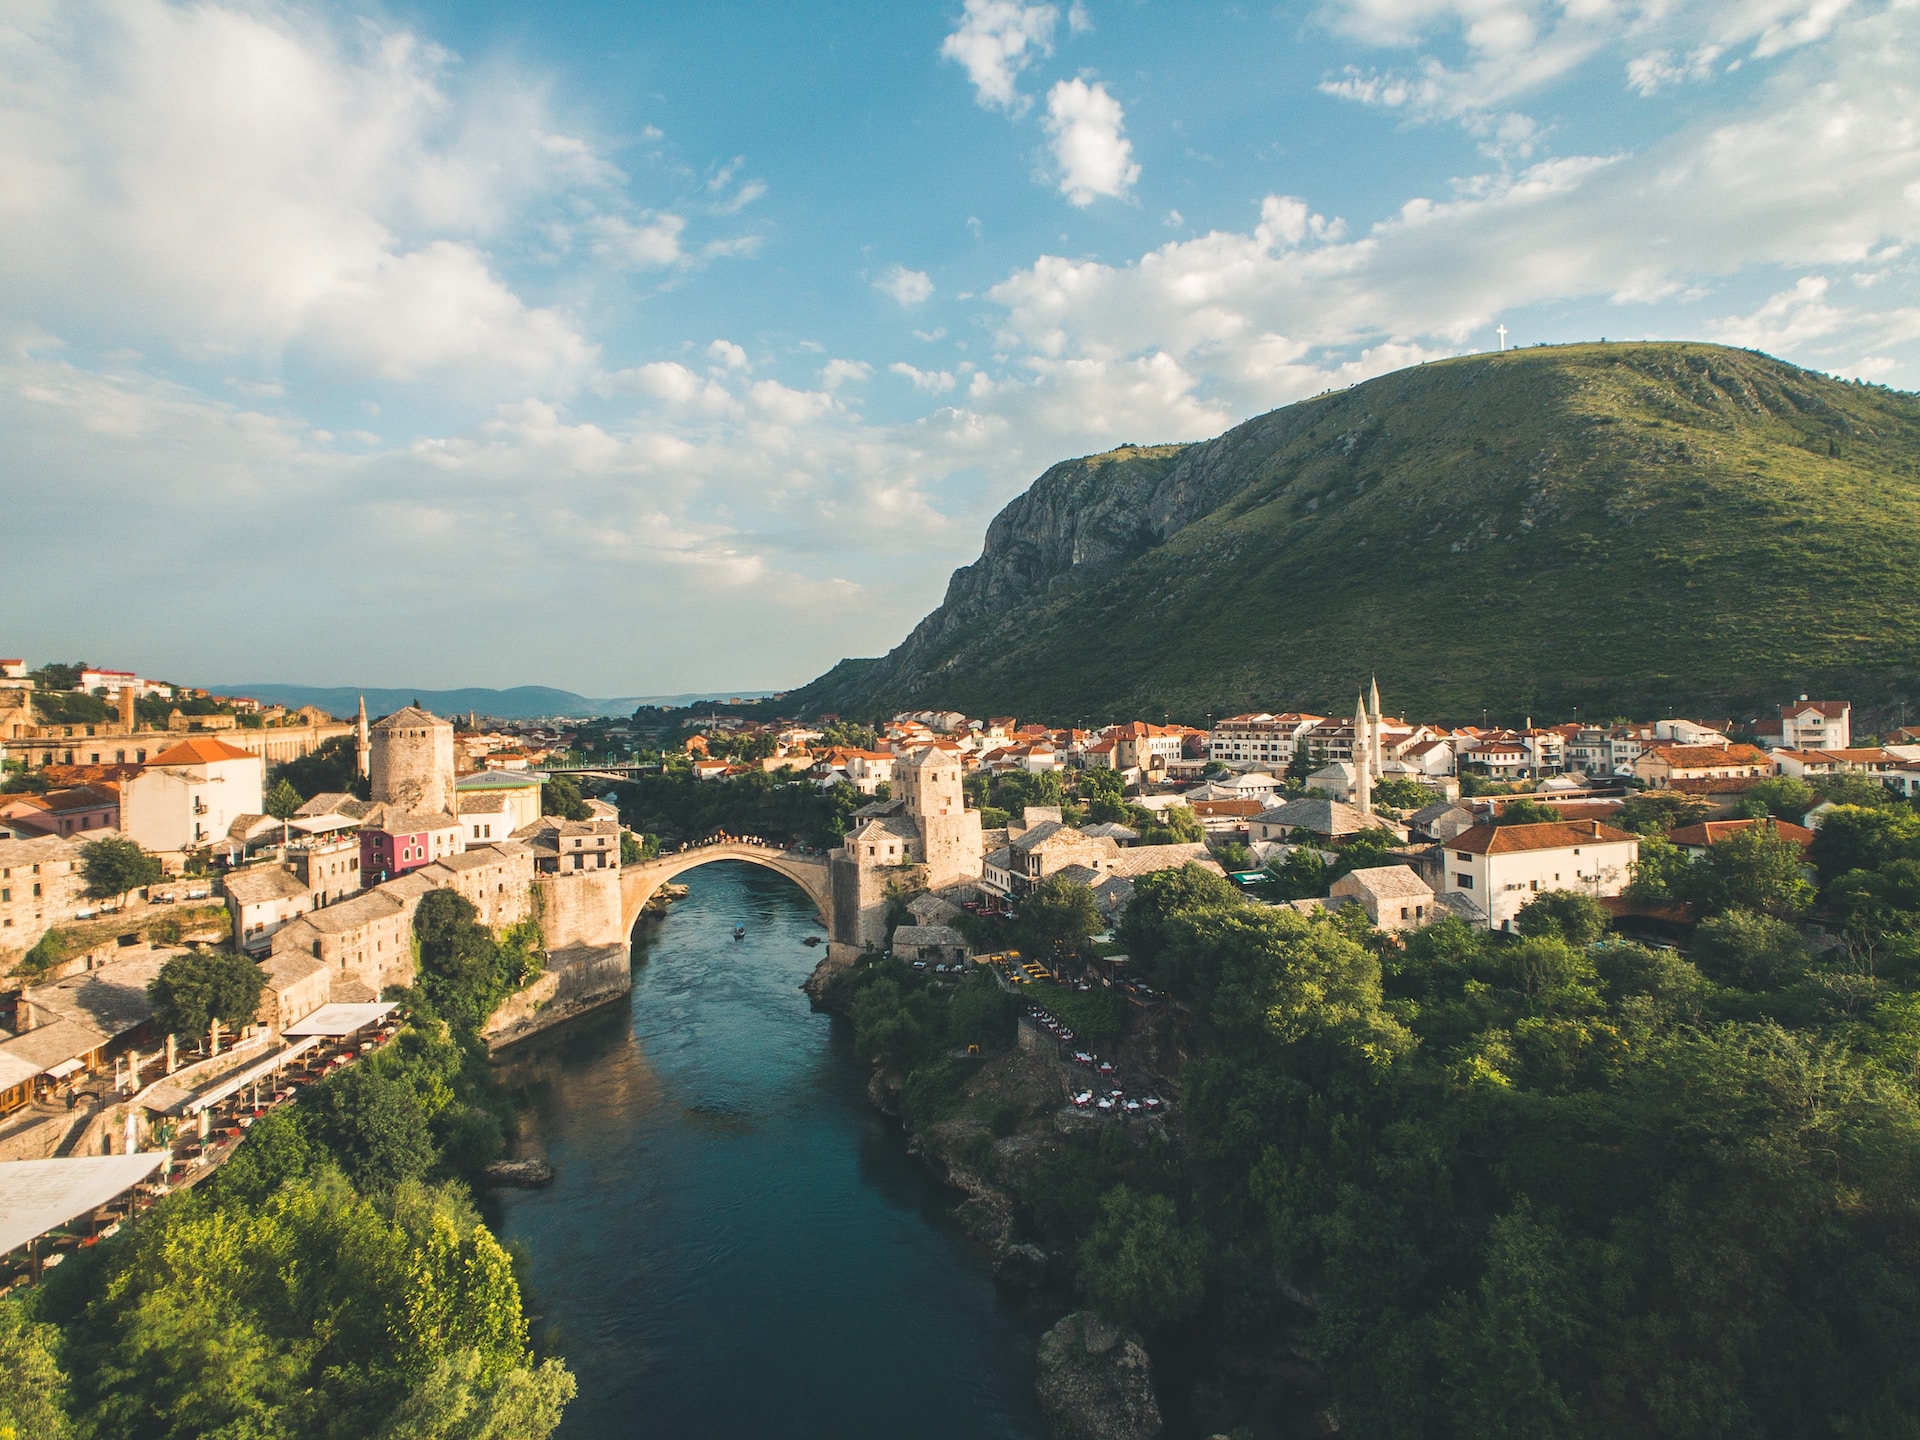 Starimost Bridge in Old Town Mostar (photo: Yu Siang Teo)